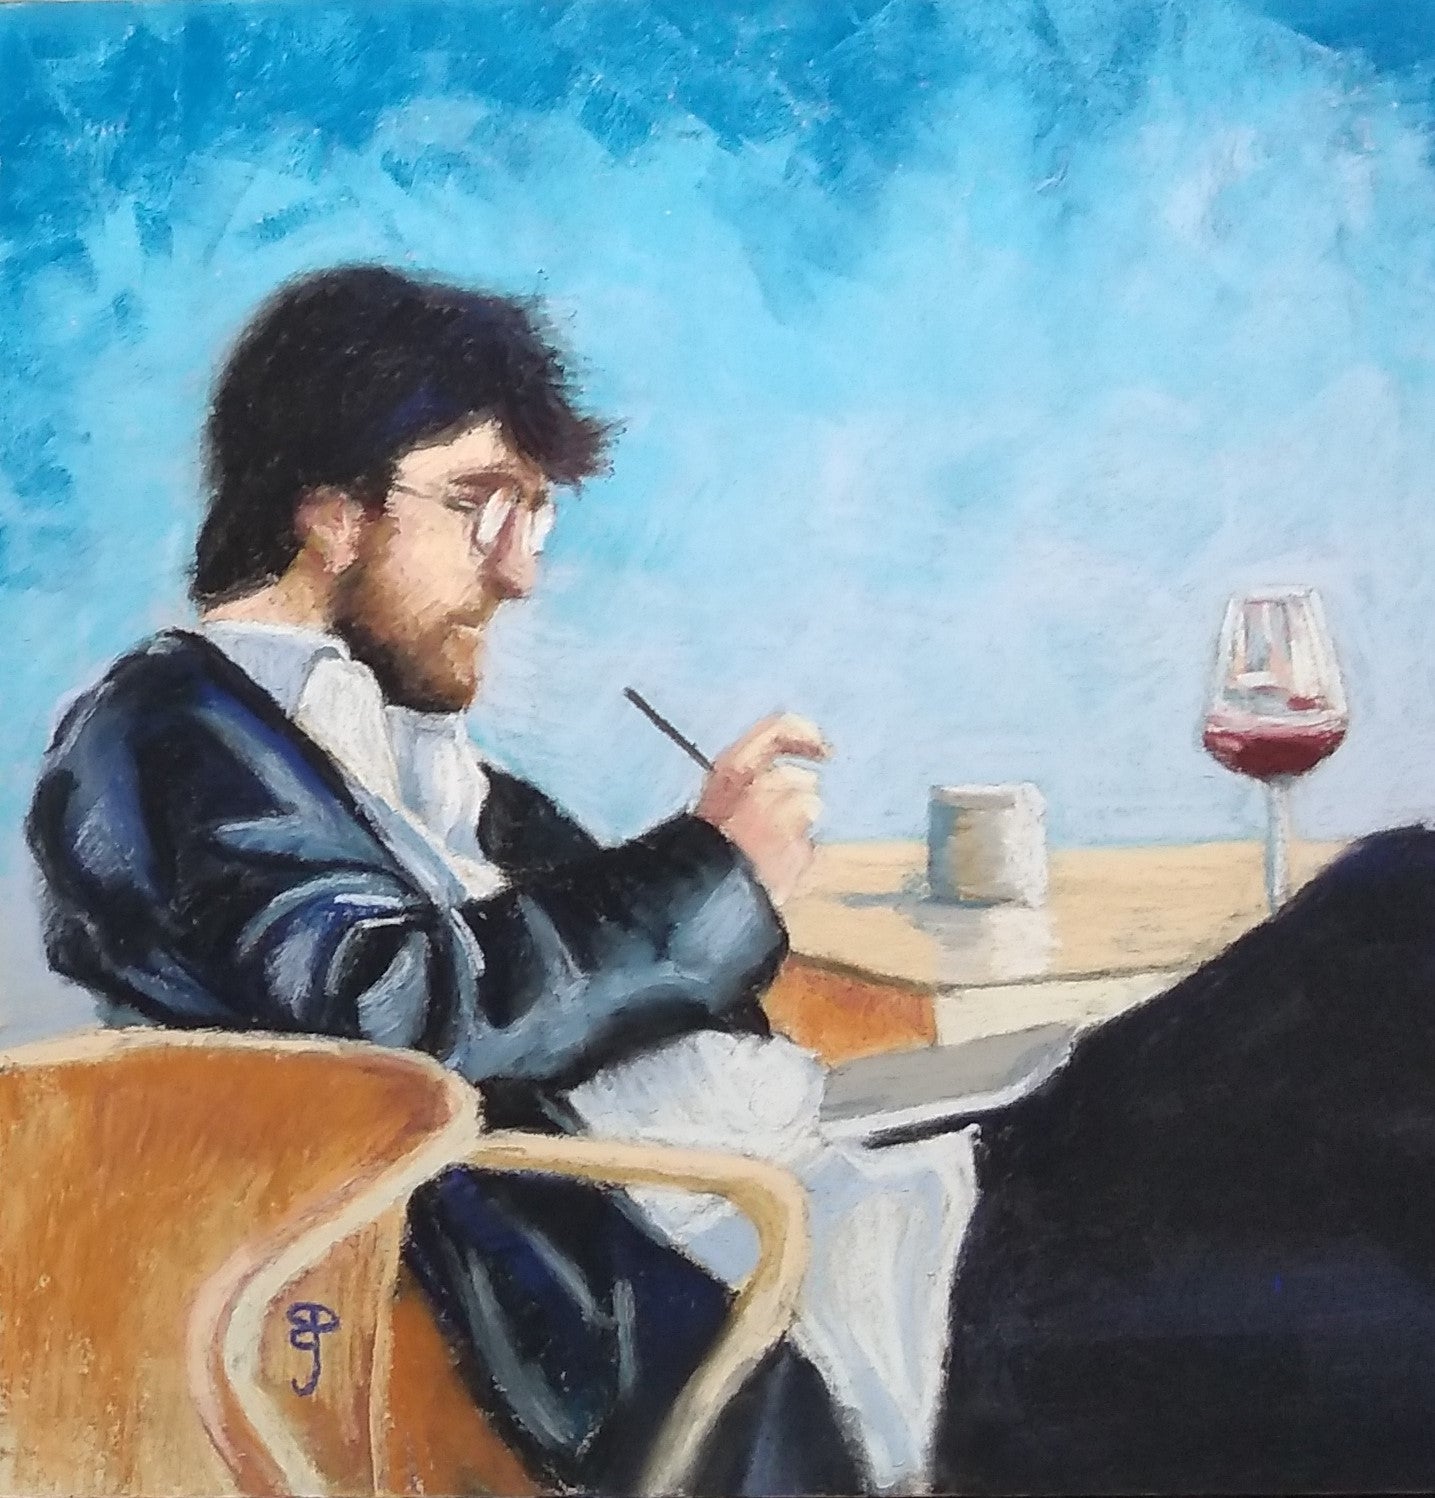 A pastel painting by Brian Prangle of a bearded young man in leather jacket making notes at a cafe table with a glass of redwine